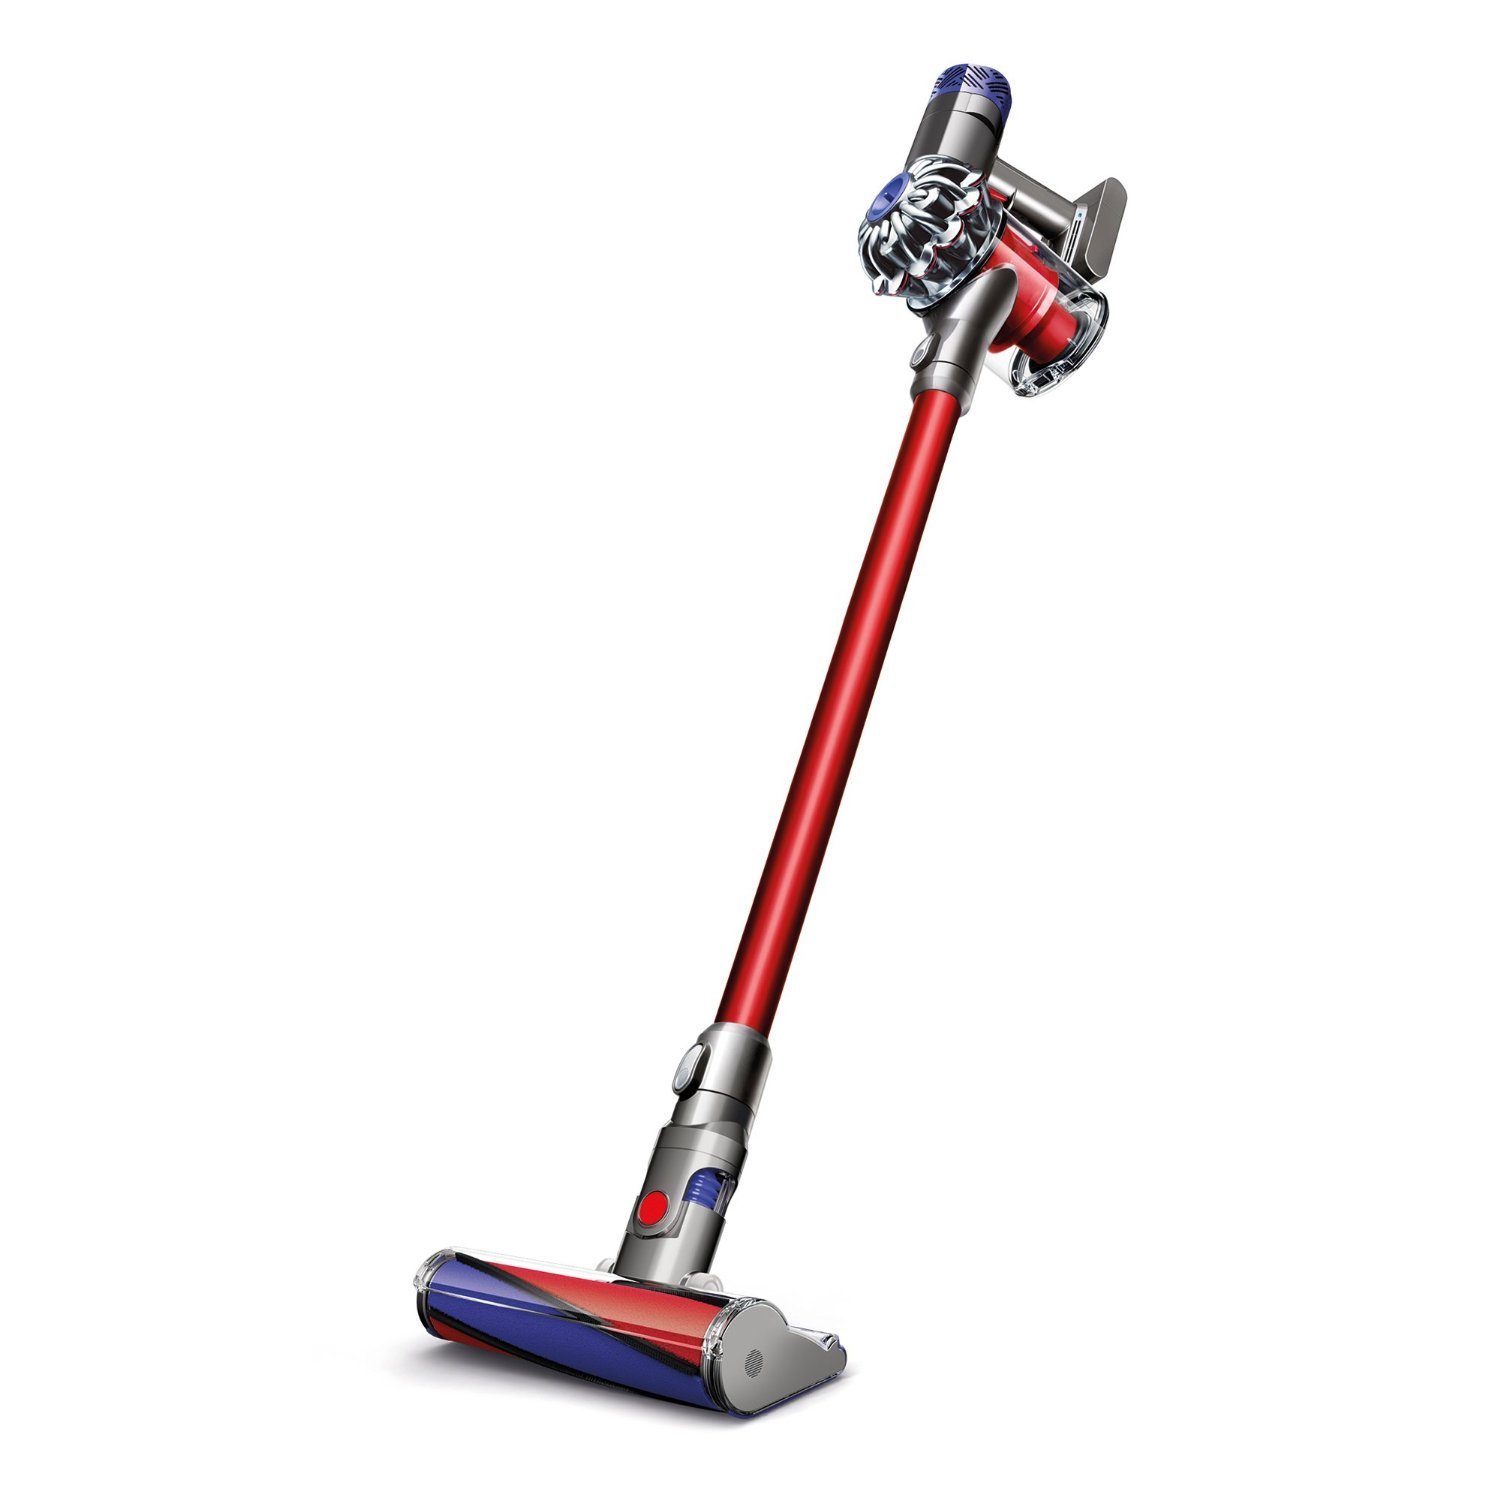 Dyson V6 Absolute Cordless Vacuum – Certified Refurbished – Just $299.99!